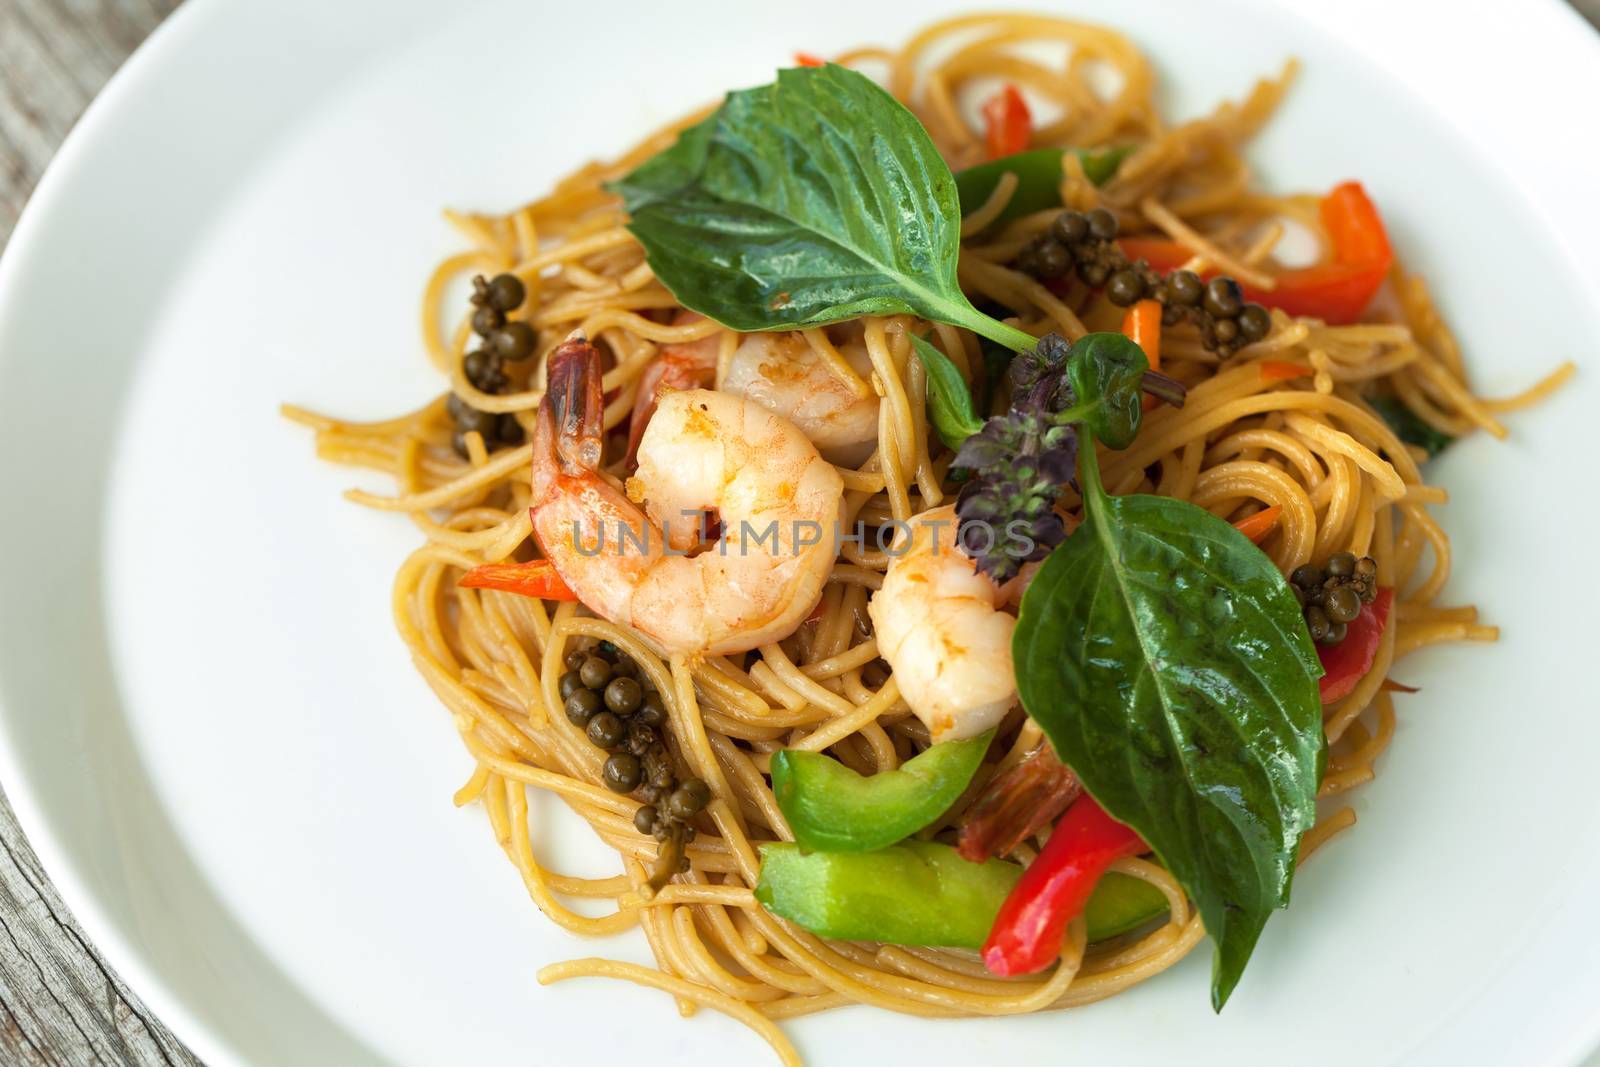 Thai Shrimp with Noodles Meal by graficallyminded